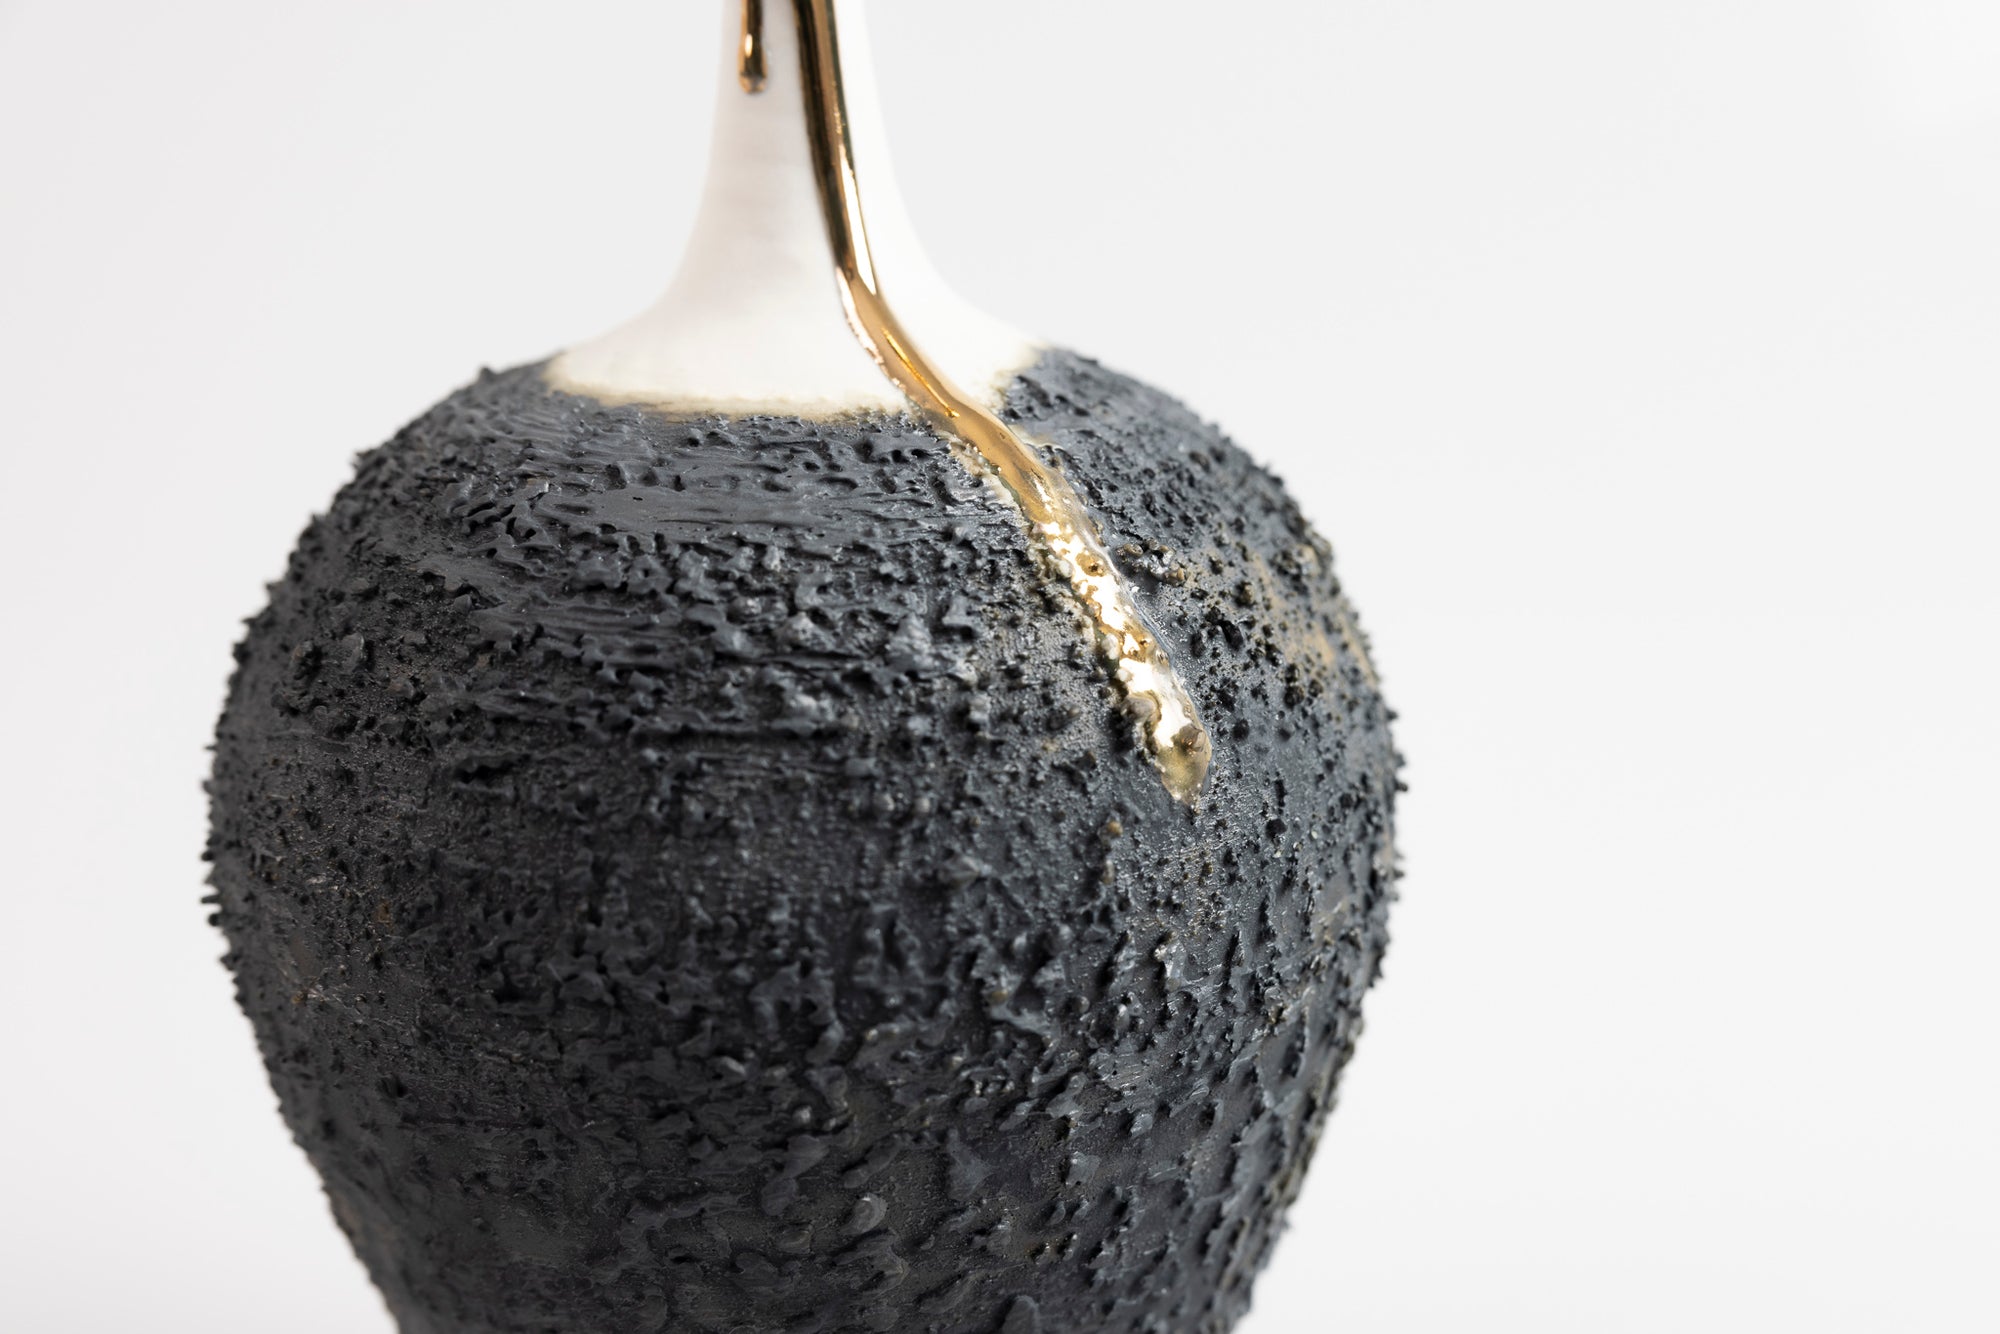 Textured long necked vase with gold lustre, by Alex McCarthy, available at Padstow Gallery, Cornwall